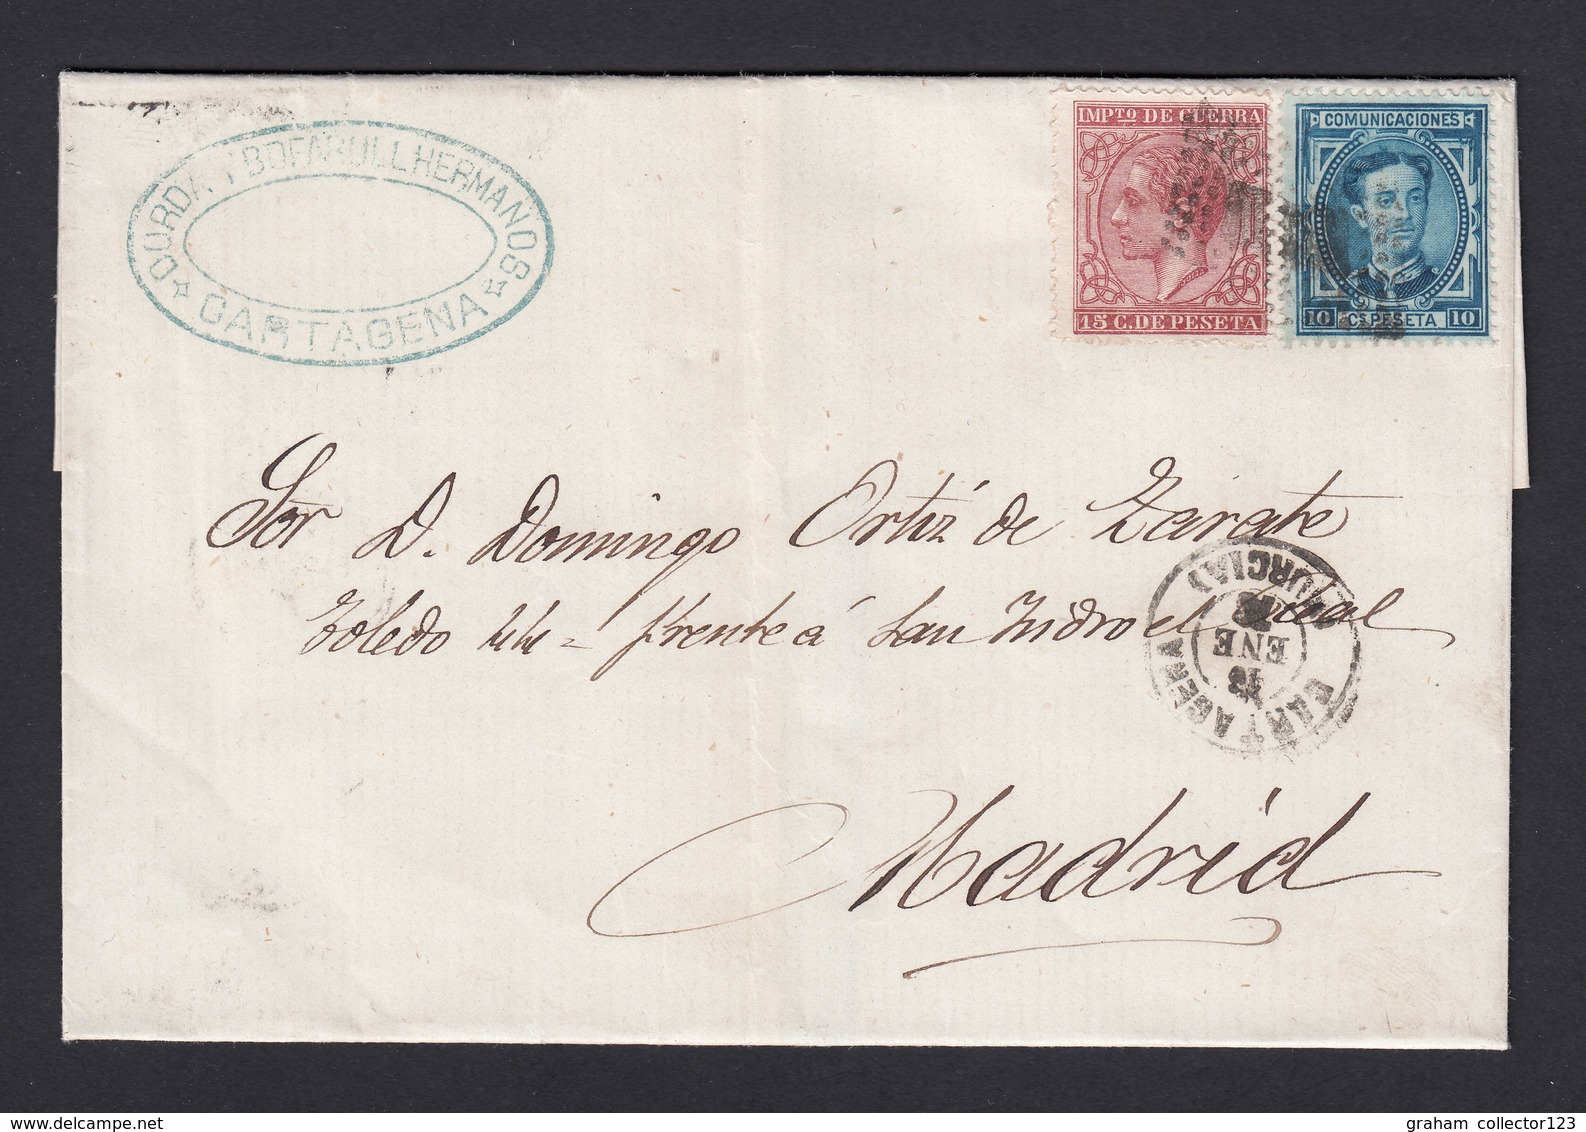 Espana Spain Spanish Cover Lettre Outer Wrapper Cartagena Murcia To Madrid 1870s - Lettres & Documents